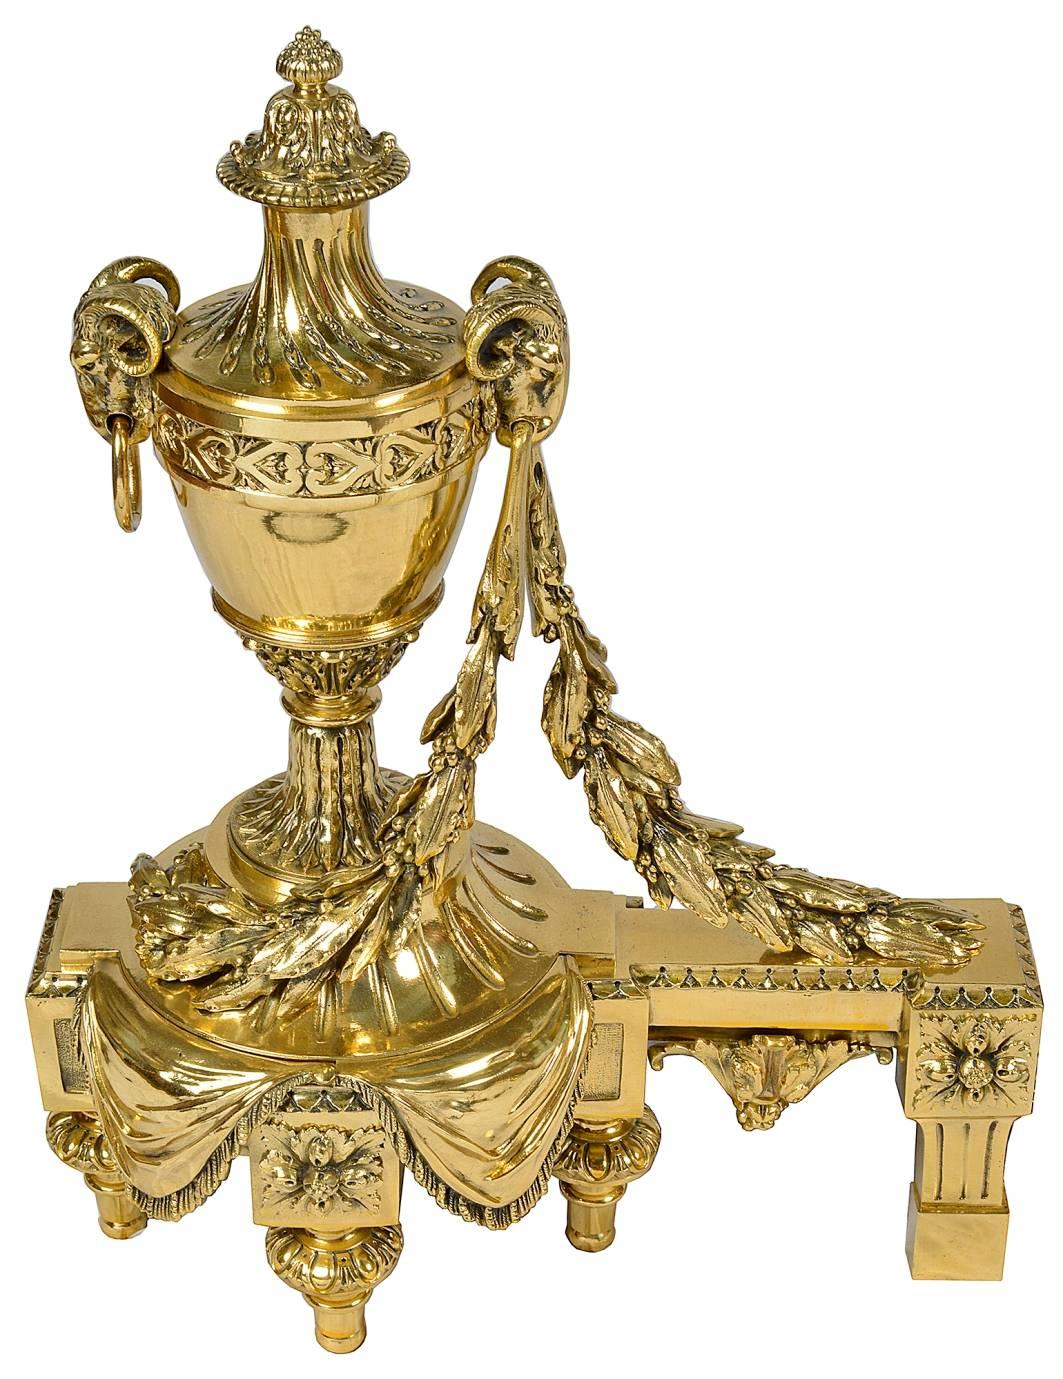 A good quality, French brass fire place fender, in the Louis XVI style. Having classical urns on either side with ram's head mounts and foliate swags. An adjustable central section with scrolling decoration allowing the fender to fit larger and